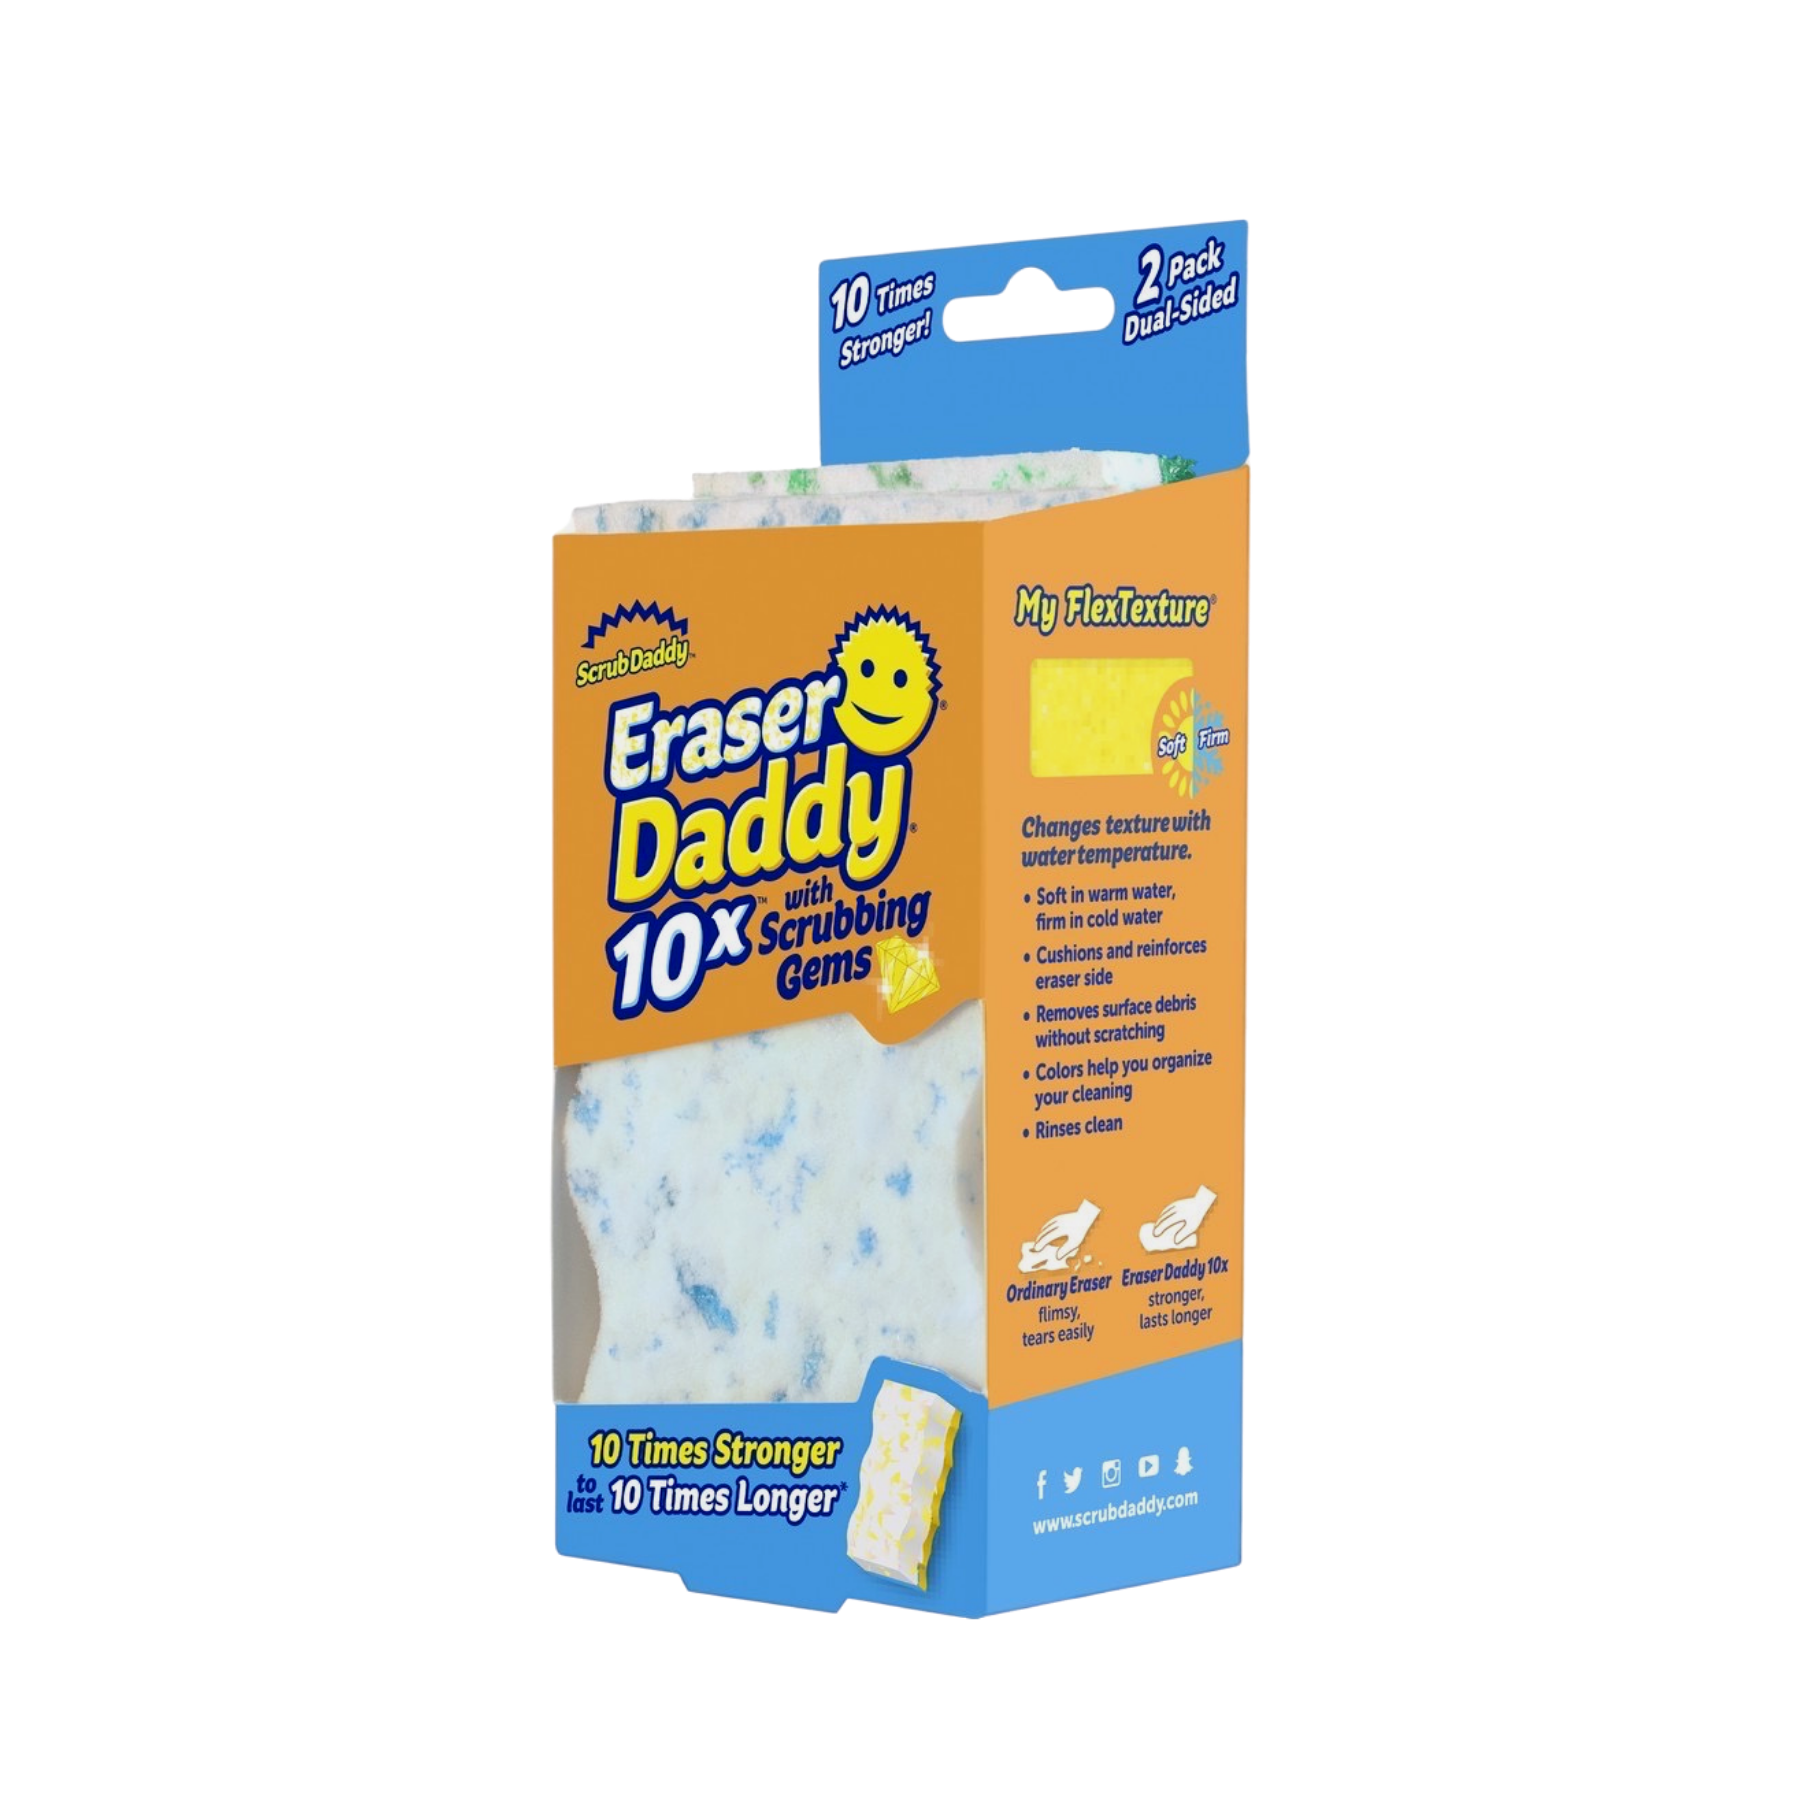 Eraser Daddy dual sided spot remover - Scrub Daddy official video